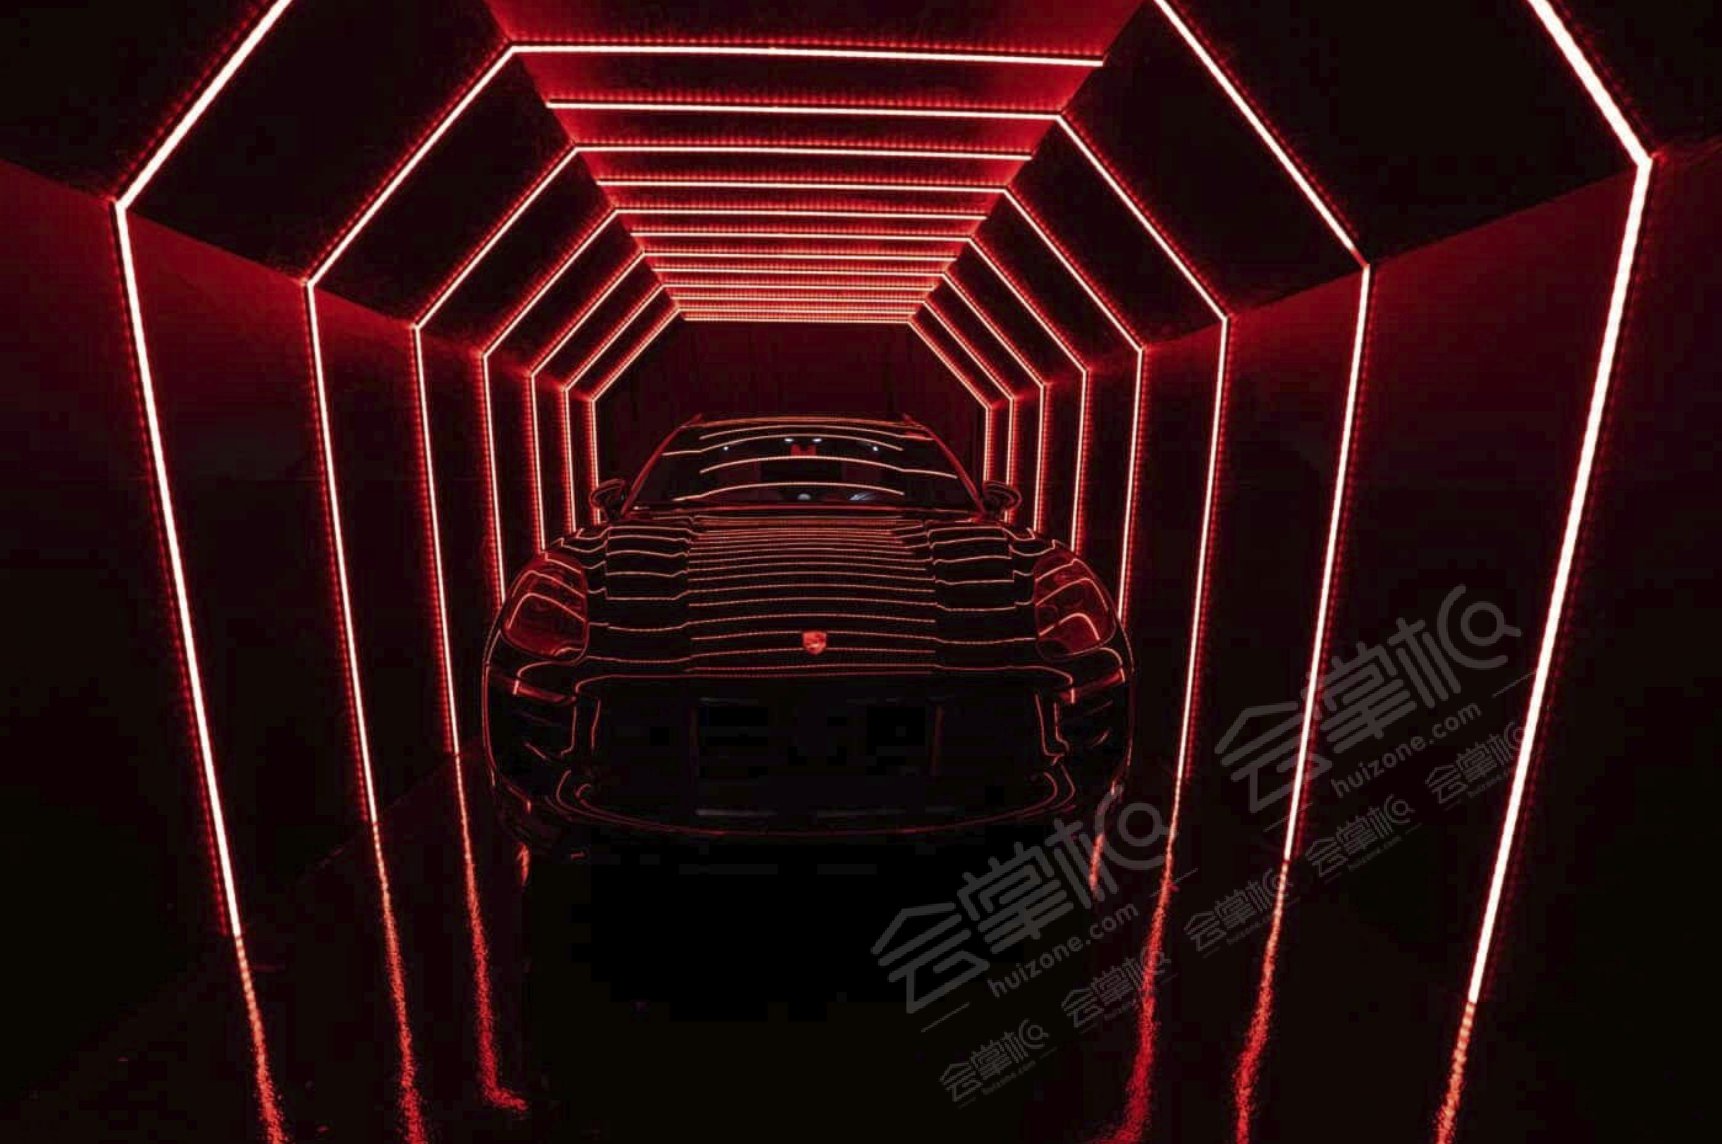 Chi-1 Large blackout studio with high ceilings, a Sport Bike, controllable sound synchronized RGB Lights, and RGB Tunnel for car photo and video shoots